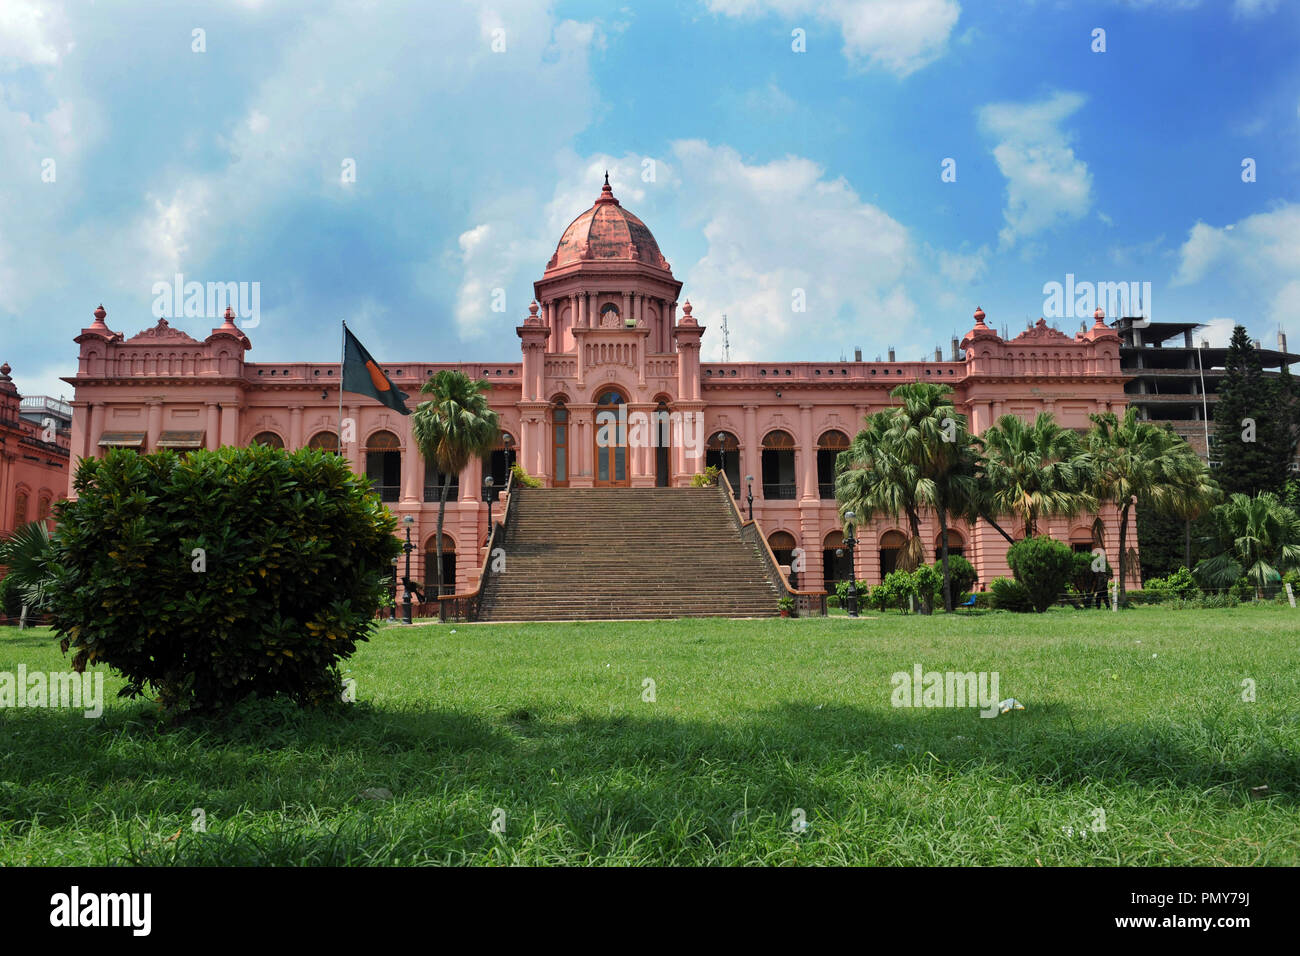 Dhaka, Bangladesh - June 05, 2015: Ahsan Manzil was the official residential palace and seat of the Nawab of Dhaka. The building is situated at Kumart Stock Photo